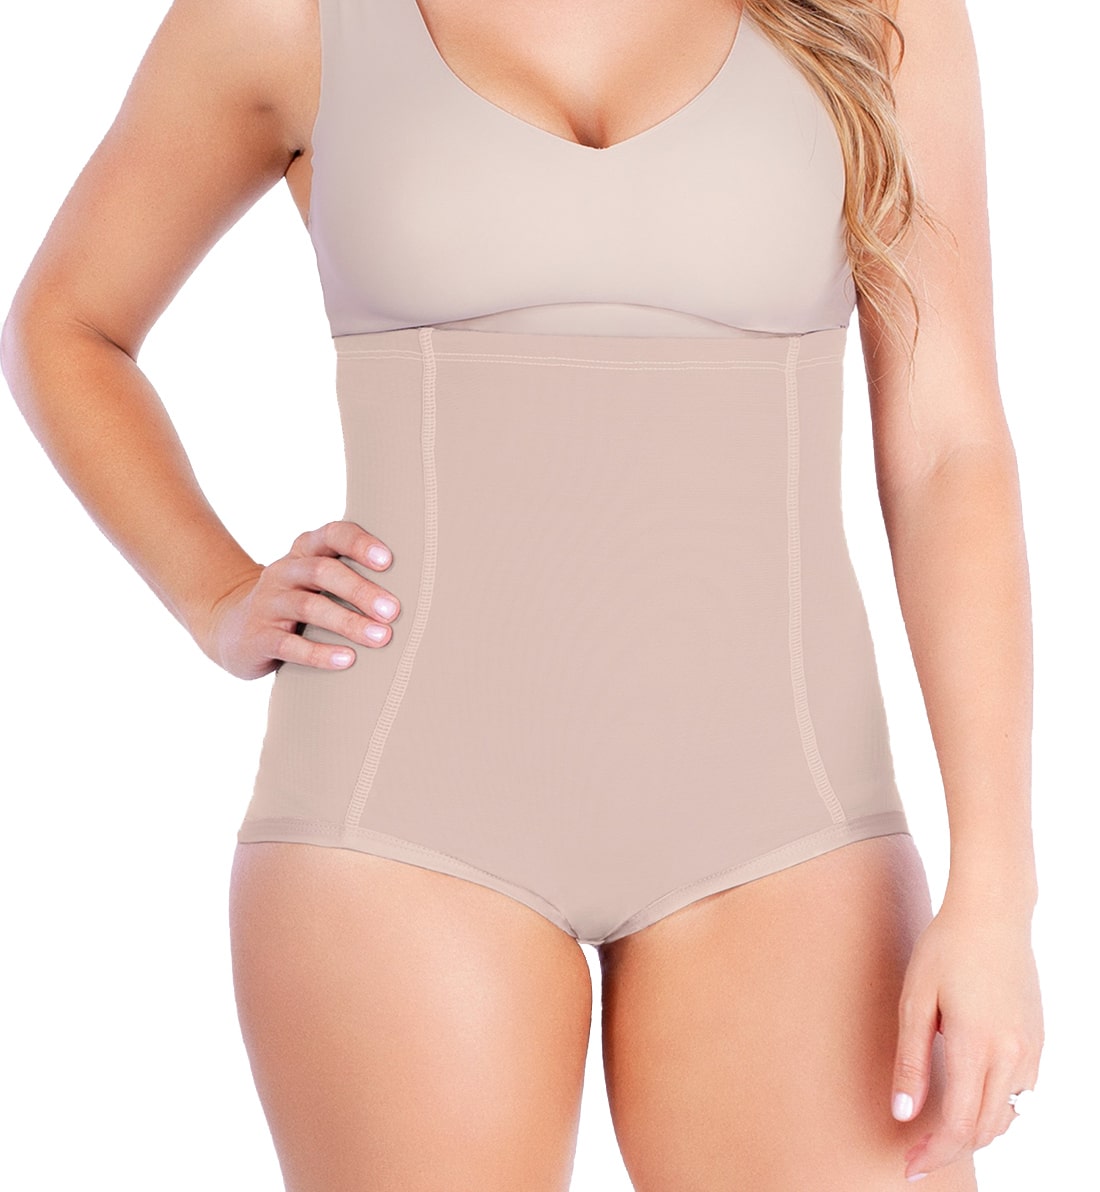 Belly Bandit Post Partum Recovery Girdle (PSTPG),XS,Nude - Nude,XS